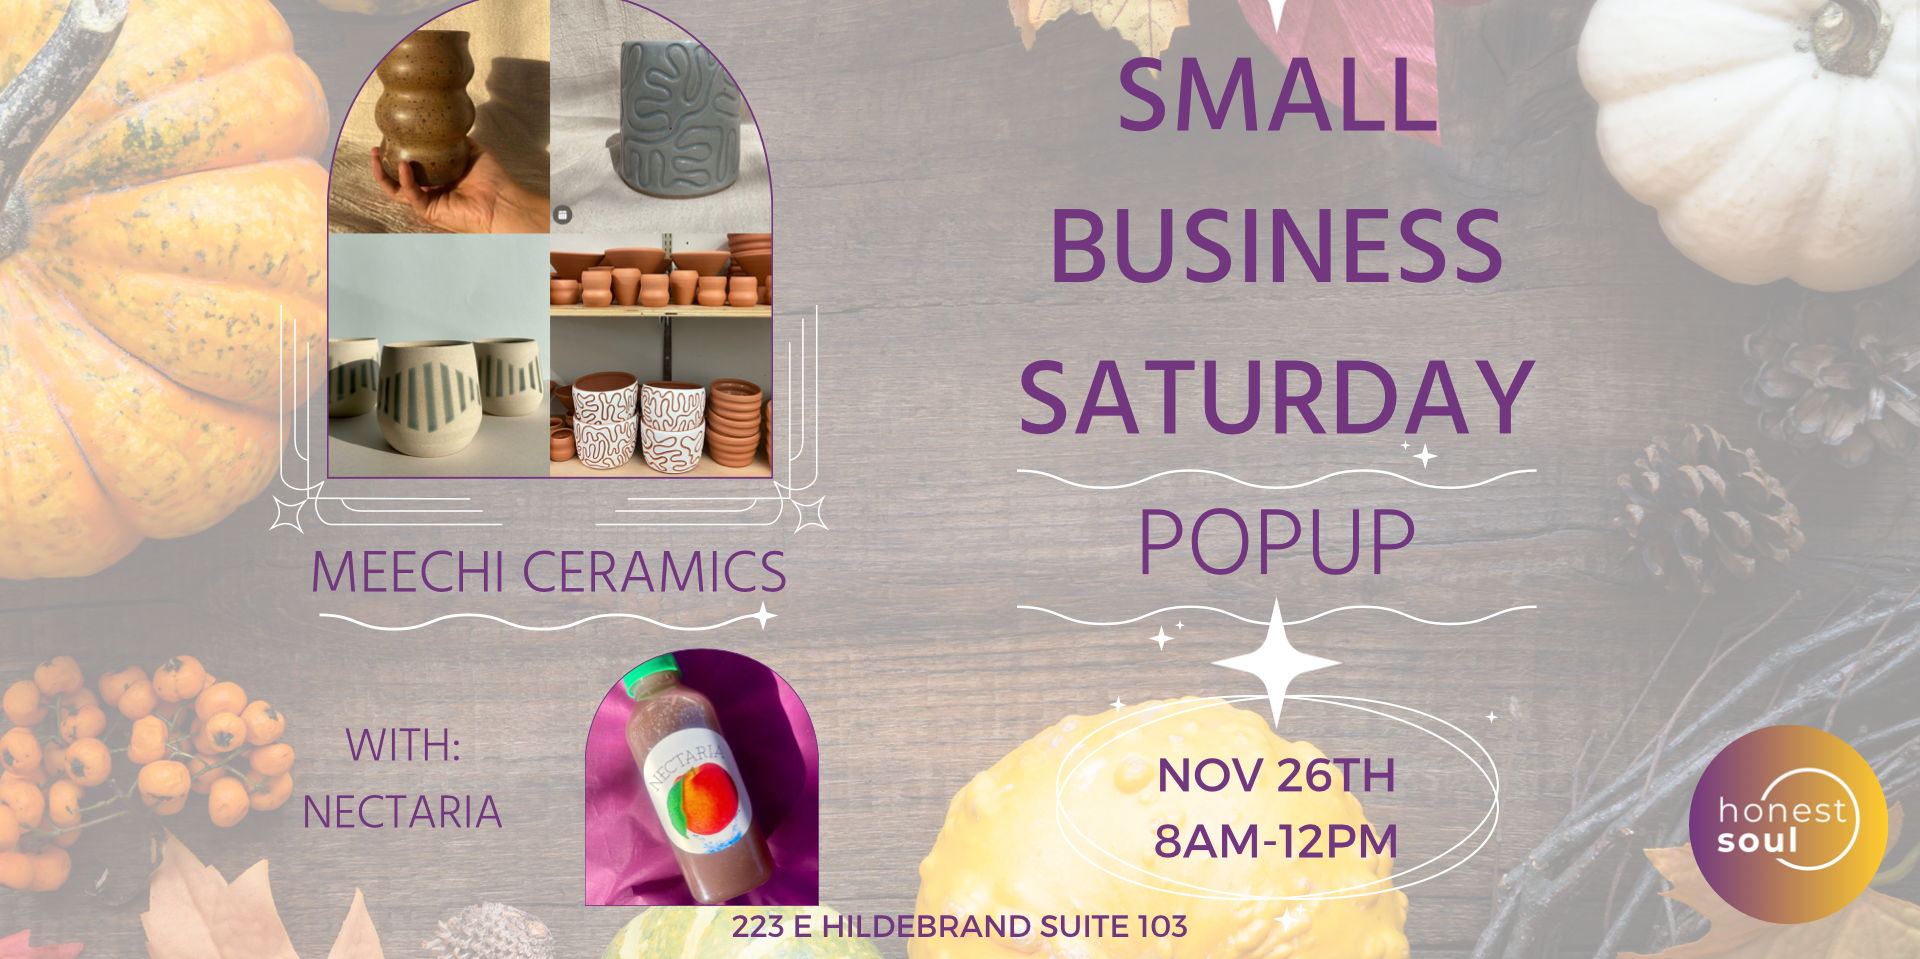 Small Business Saturday Pop Up promotional image